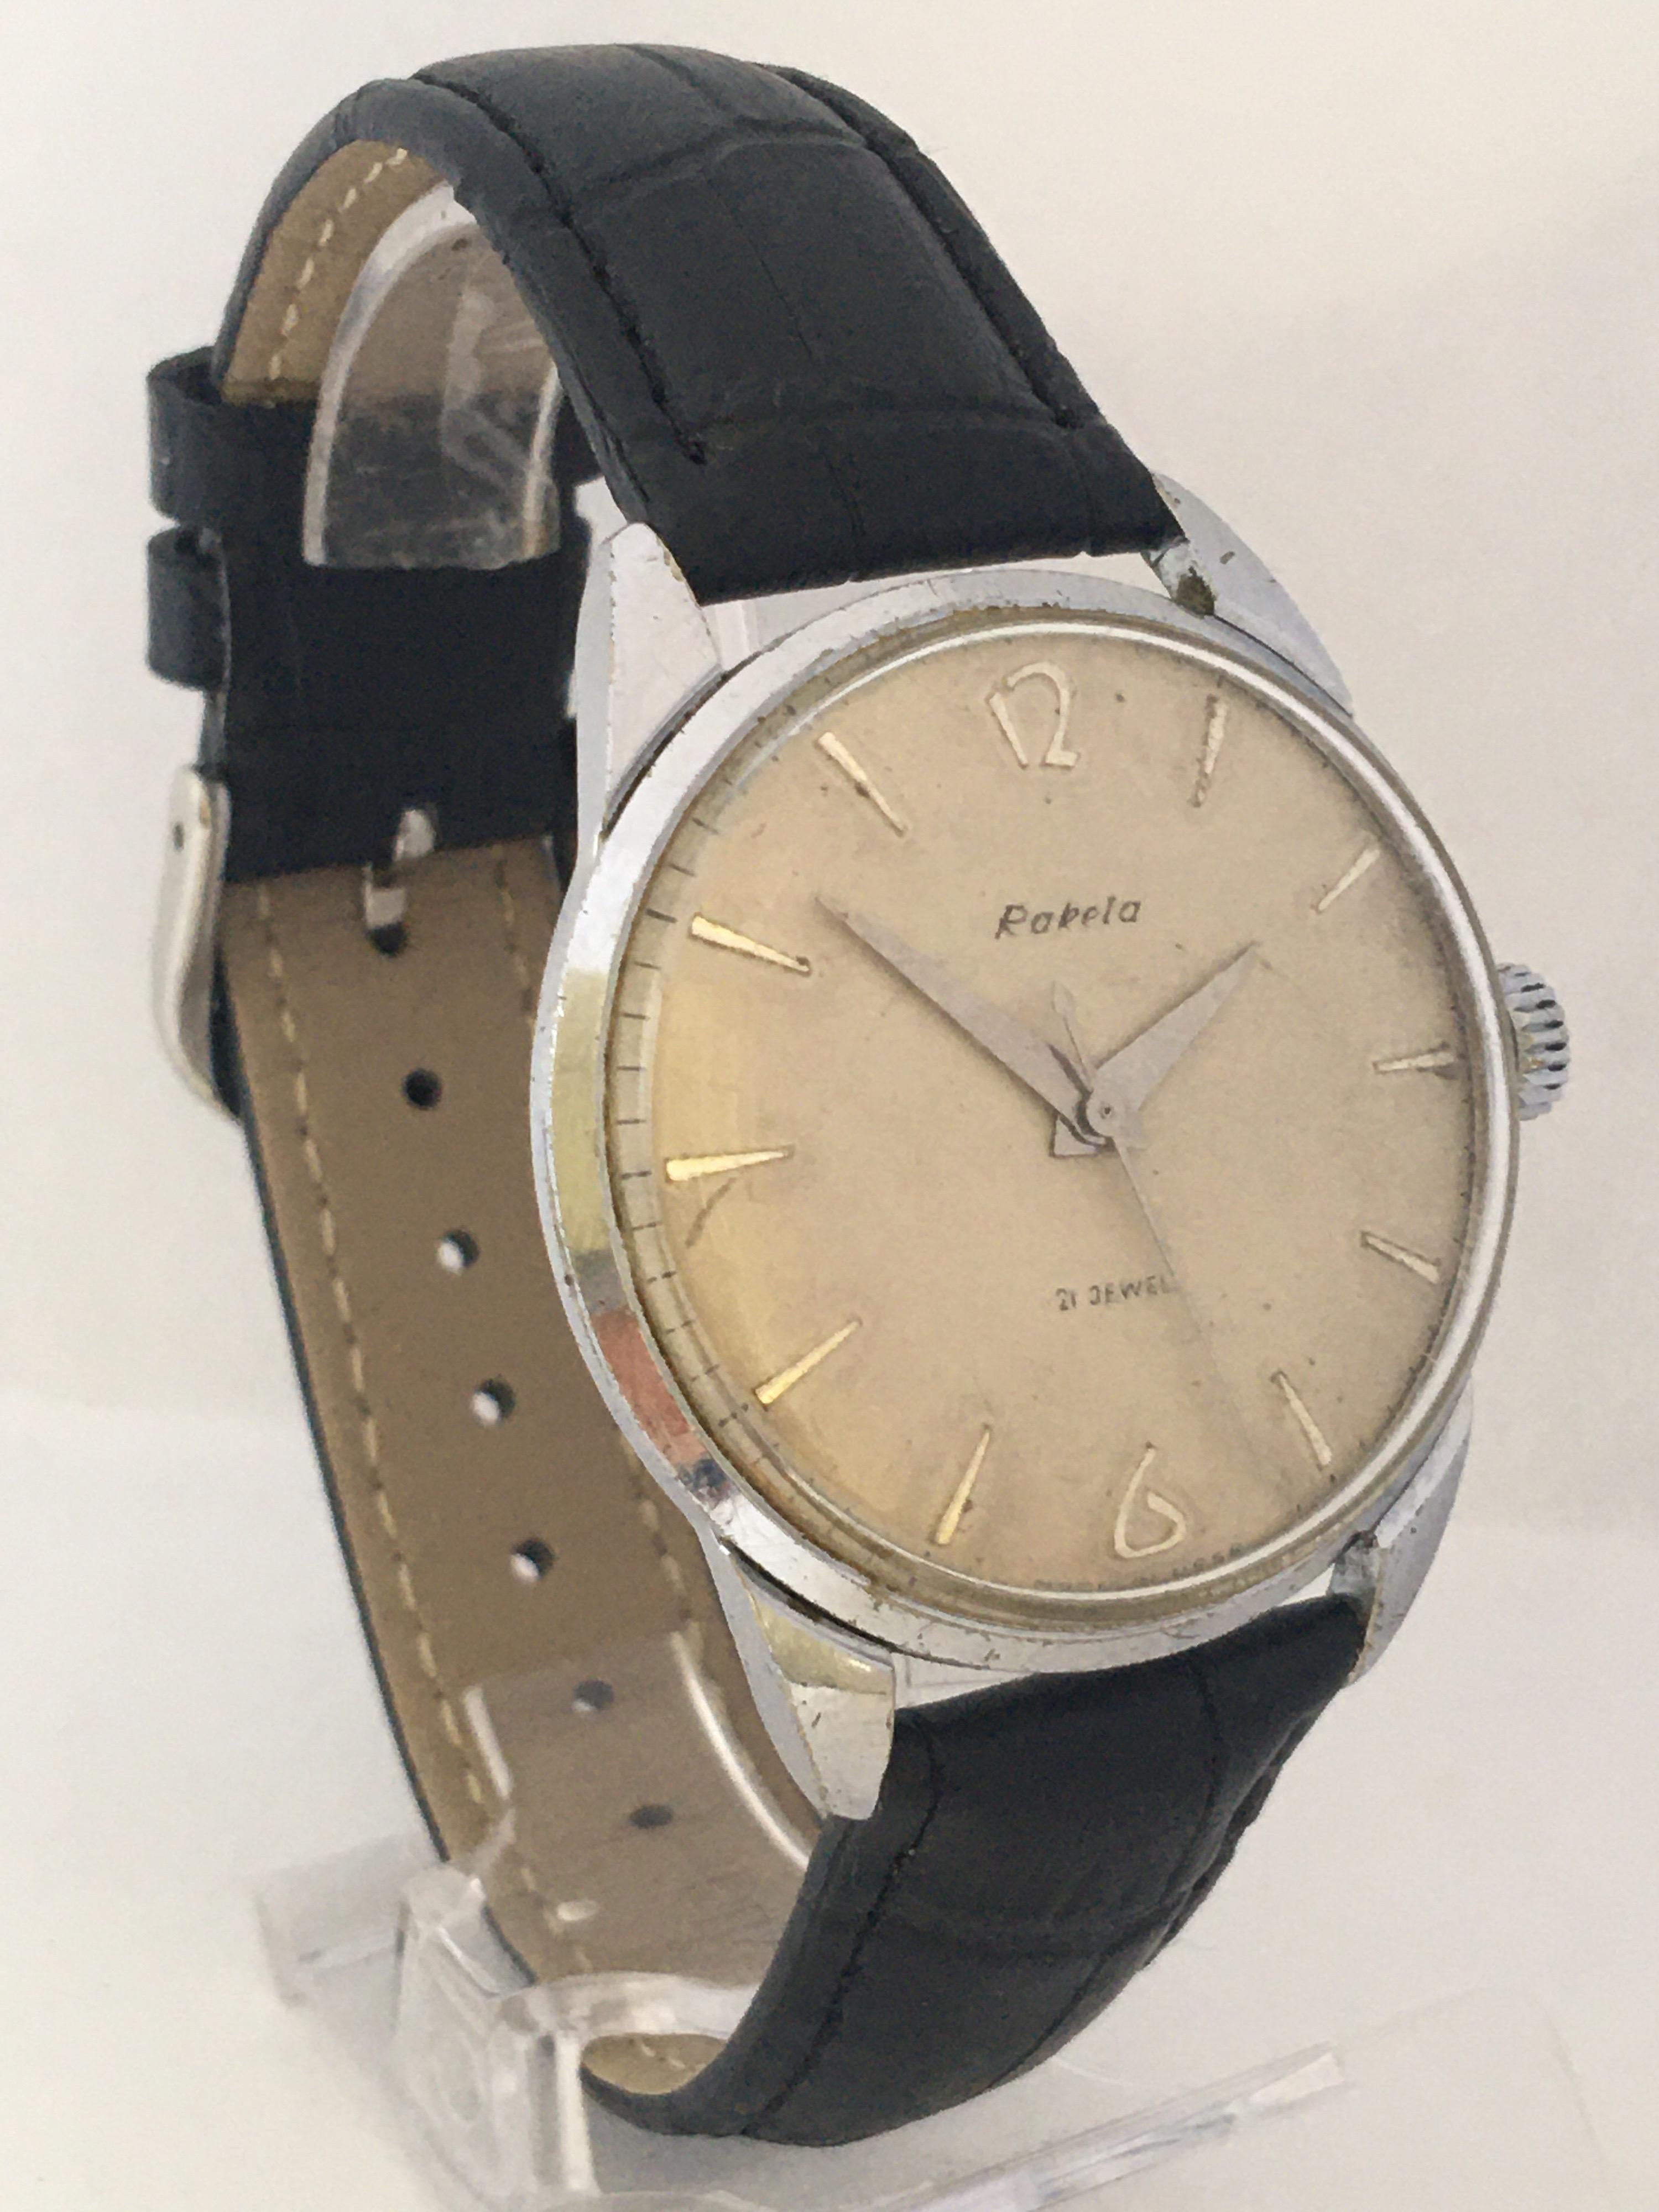 This Classic hand winding watch is in perfect working condition! The mechanical movement is in a fully working order, runs and keeps very good time. Visible signs of ageing and wear with small light scratches and  a tarnishes on the white metal case